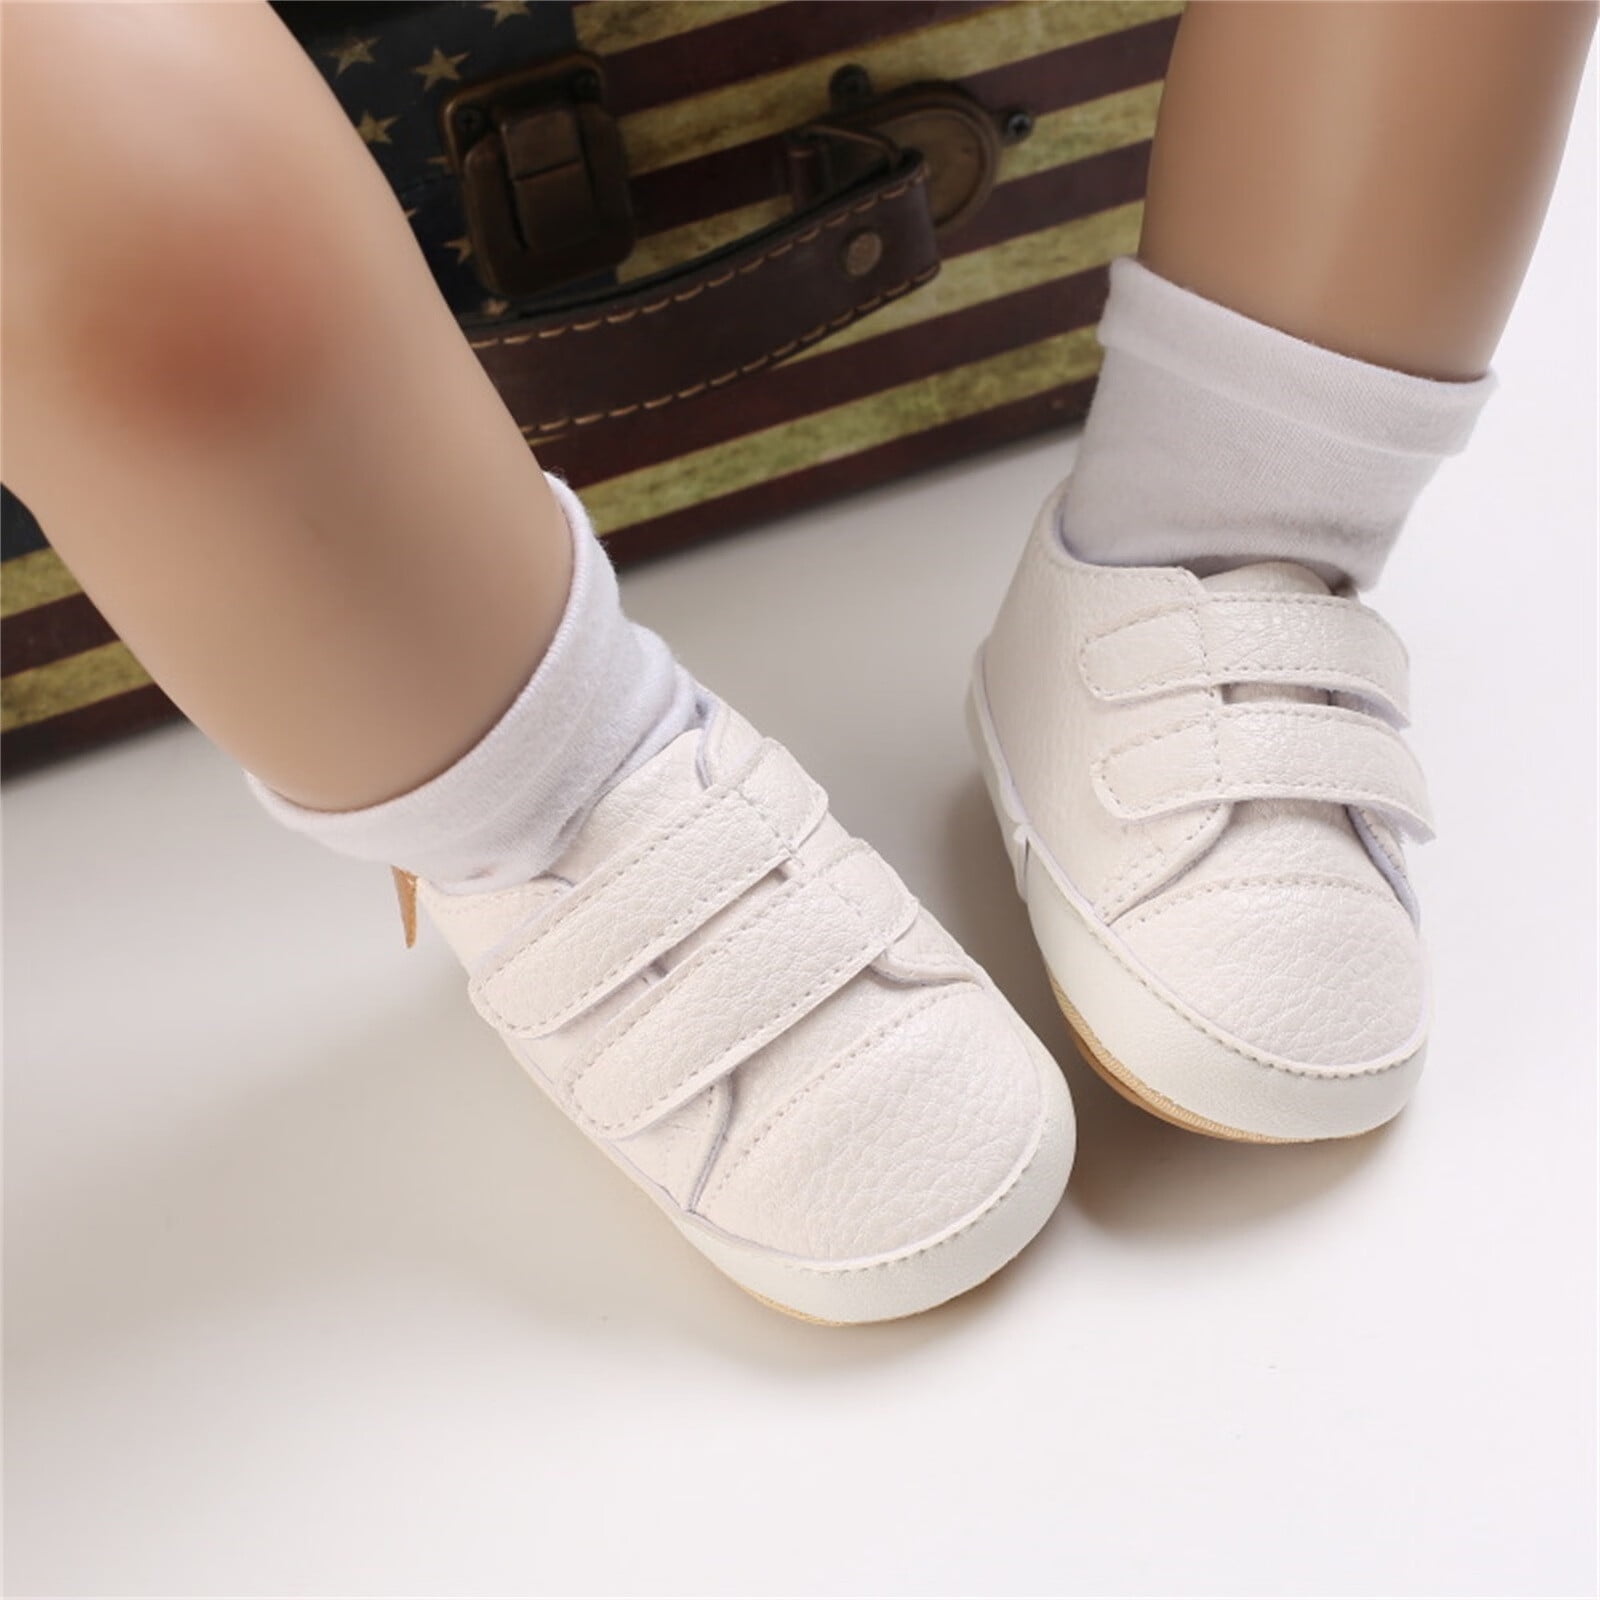 Baby Fanatic Pre-Walkers High-Top Unisex Baby Shoes - MLB St